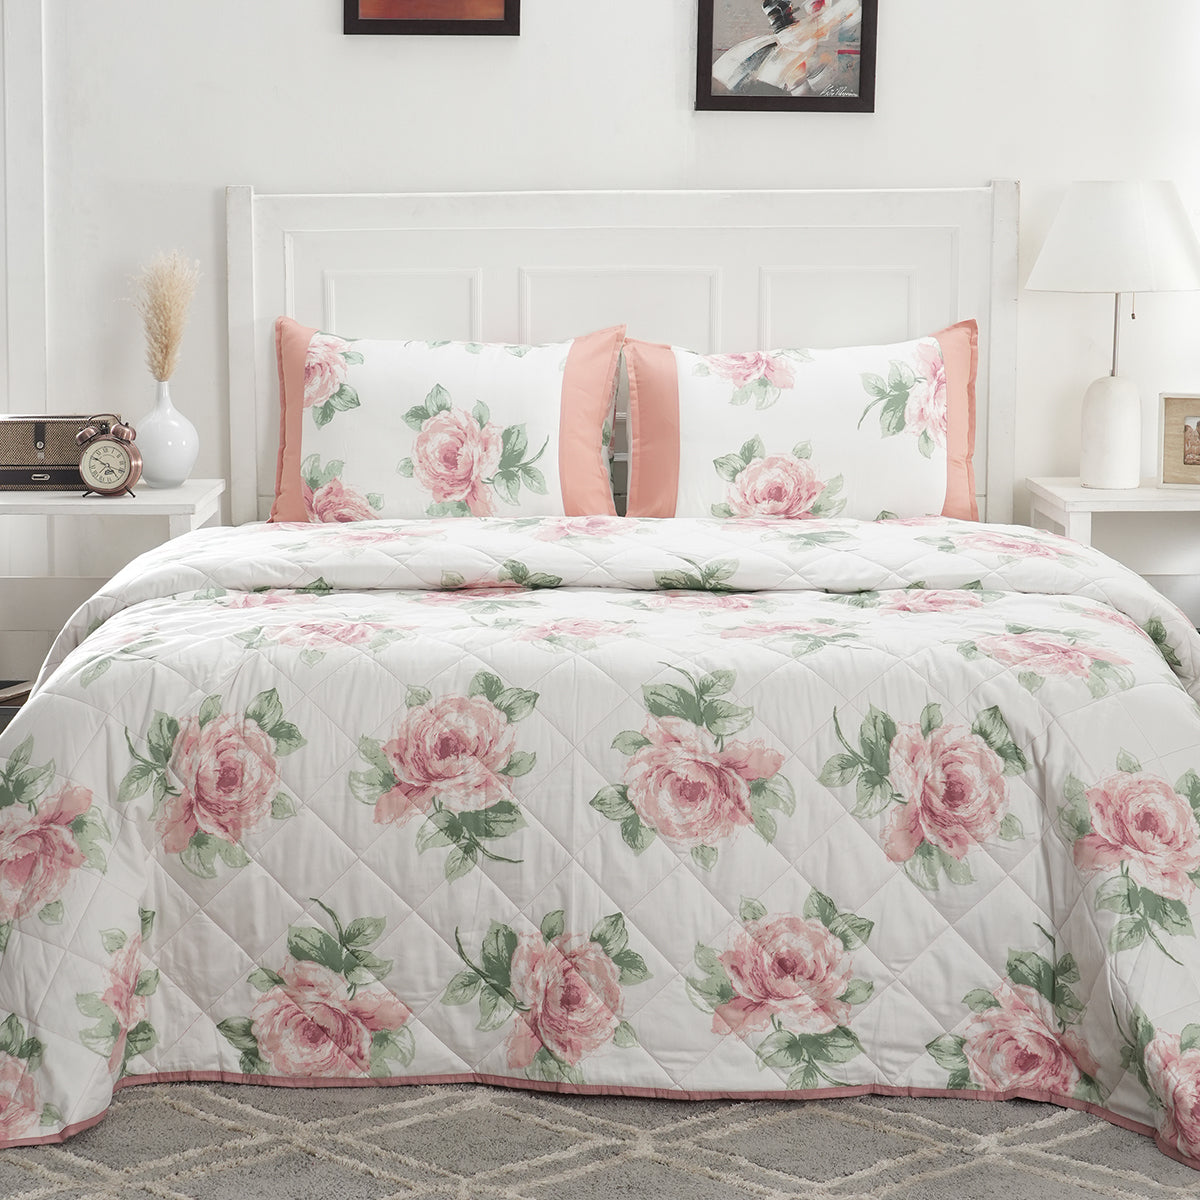 Royal Botanic Floral Garden Pink 4PC Quilt/Quilted Bed Cover Set